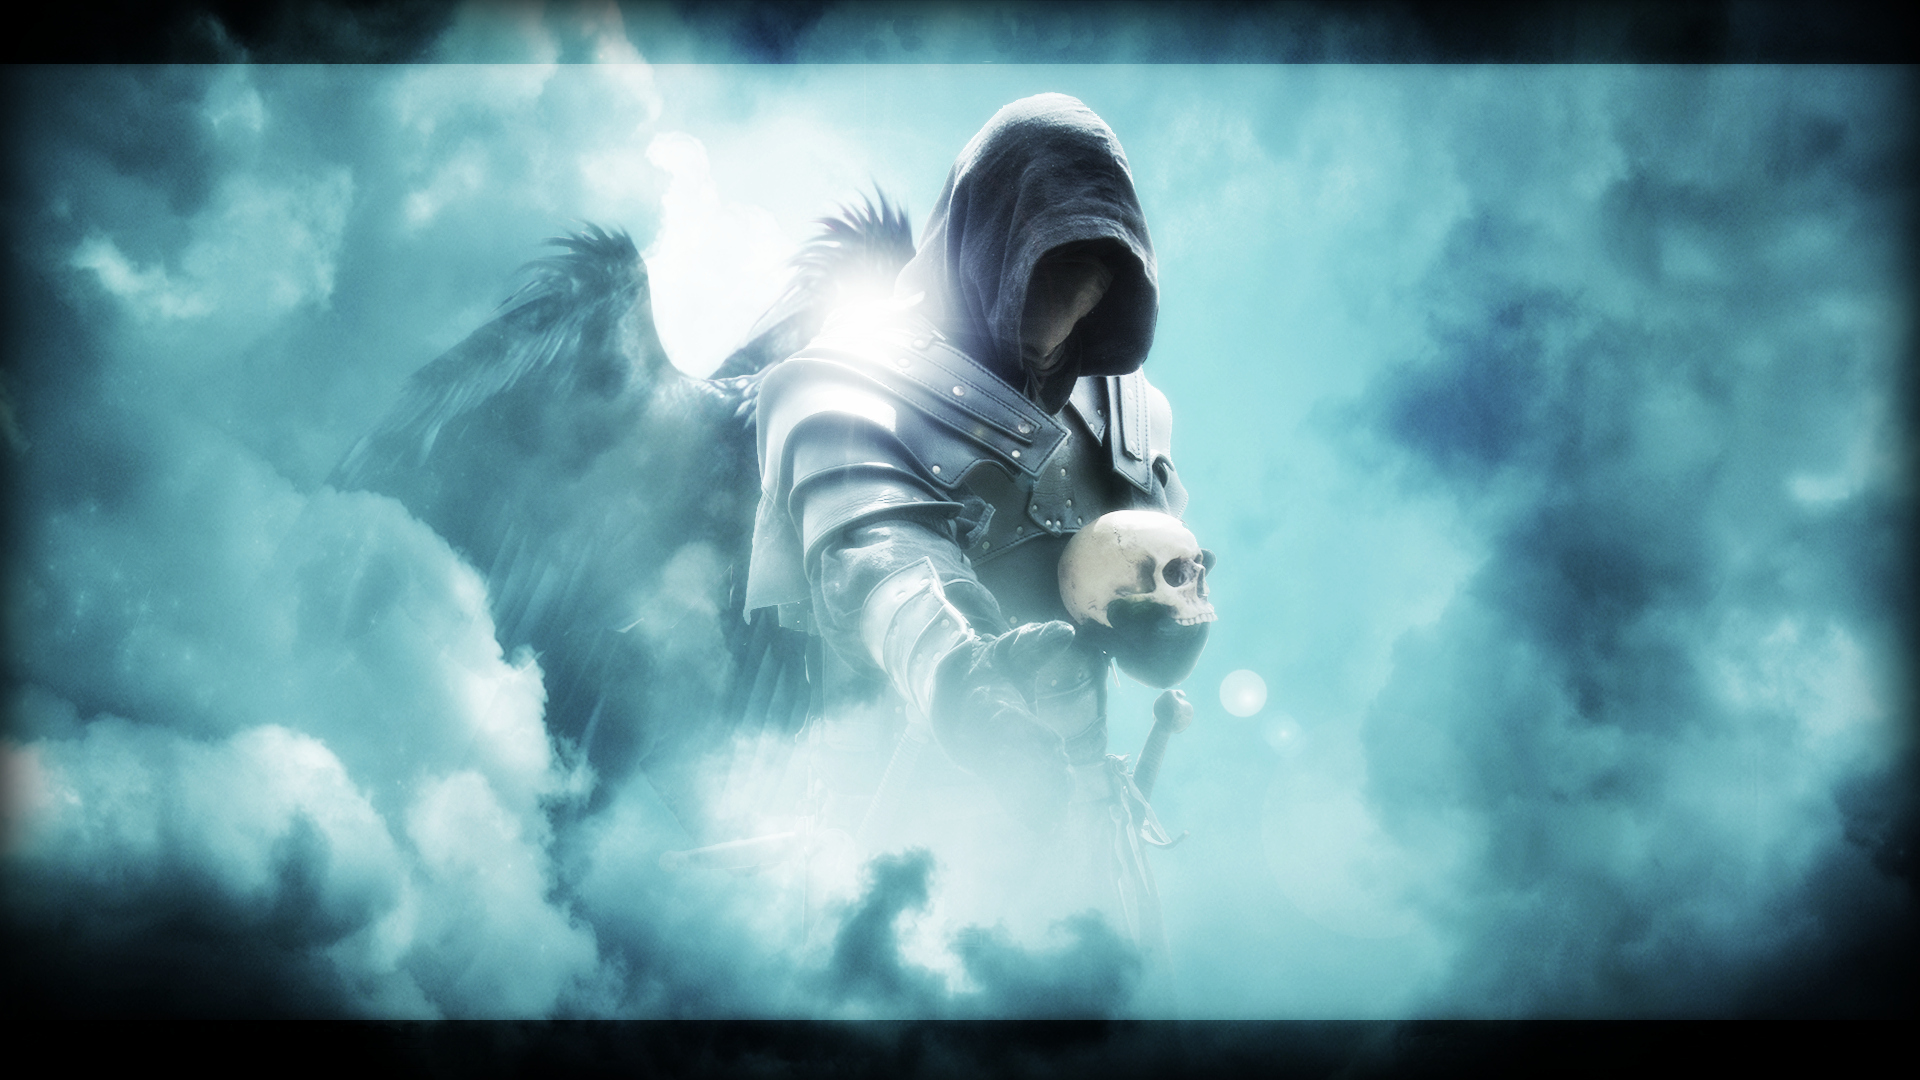 hood, assassin's creed, video game, angel, death, ezio (assassin's creed)